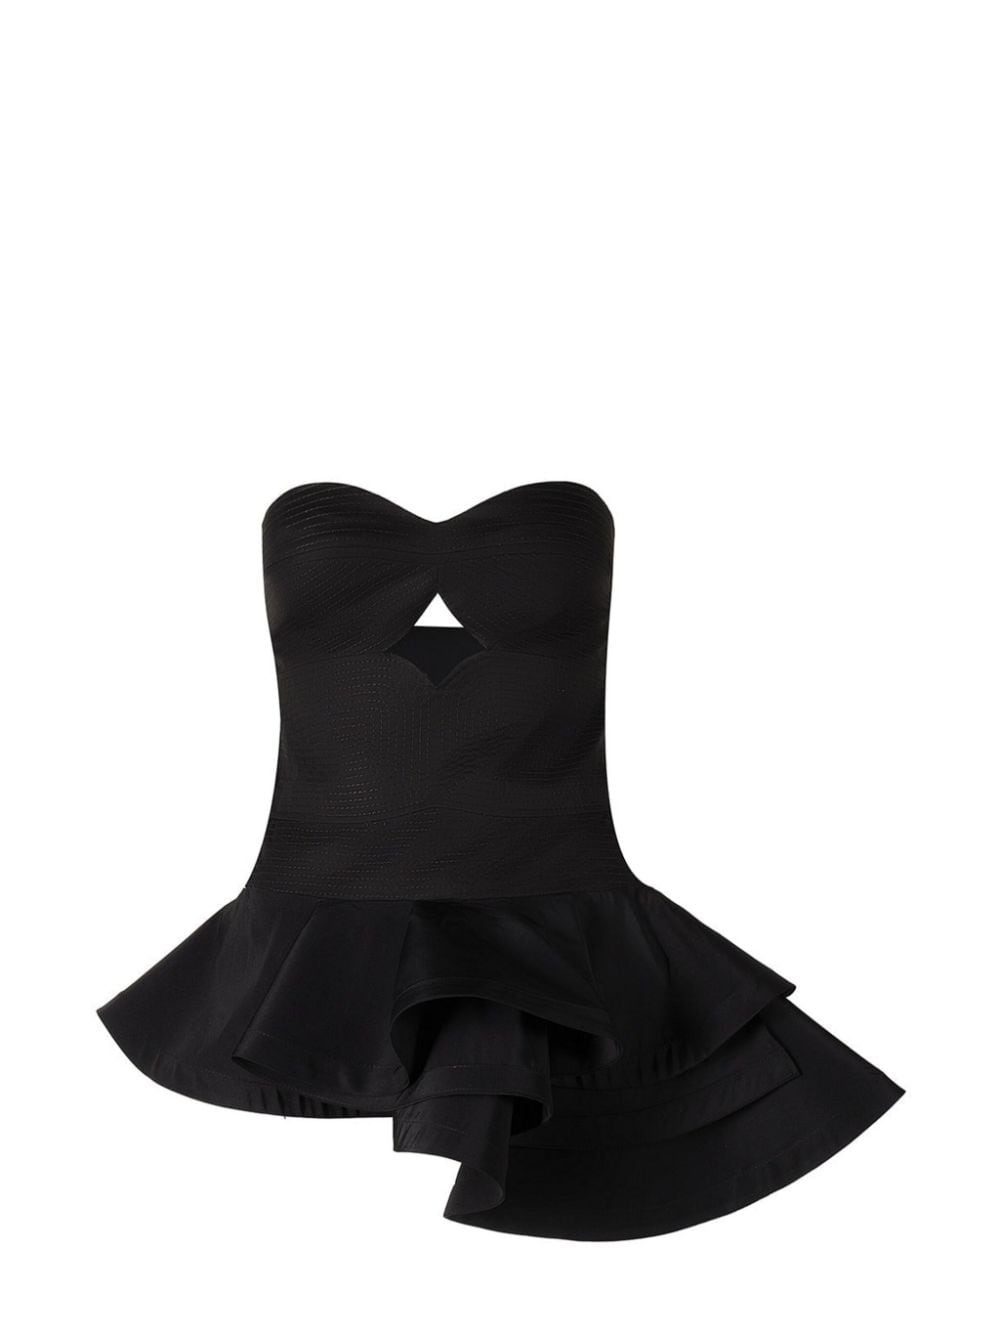 Musette strapless top - 1